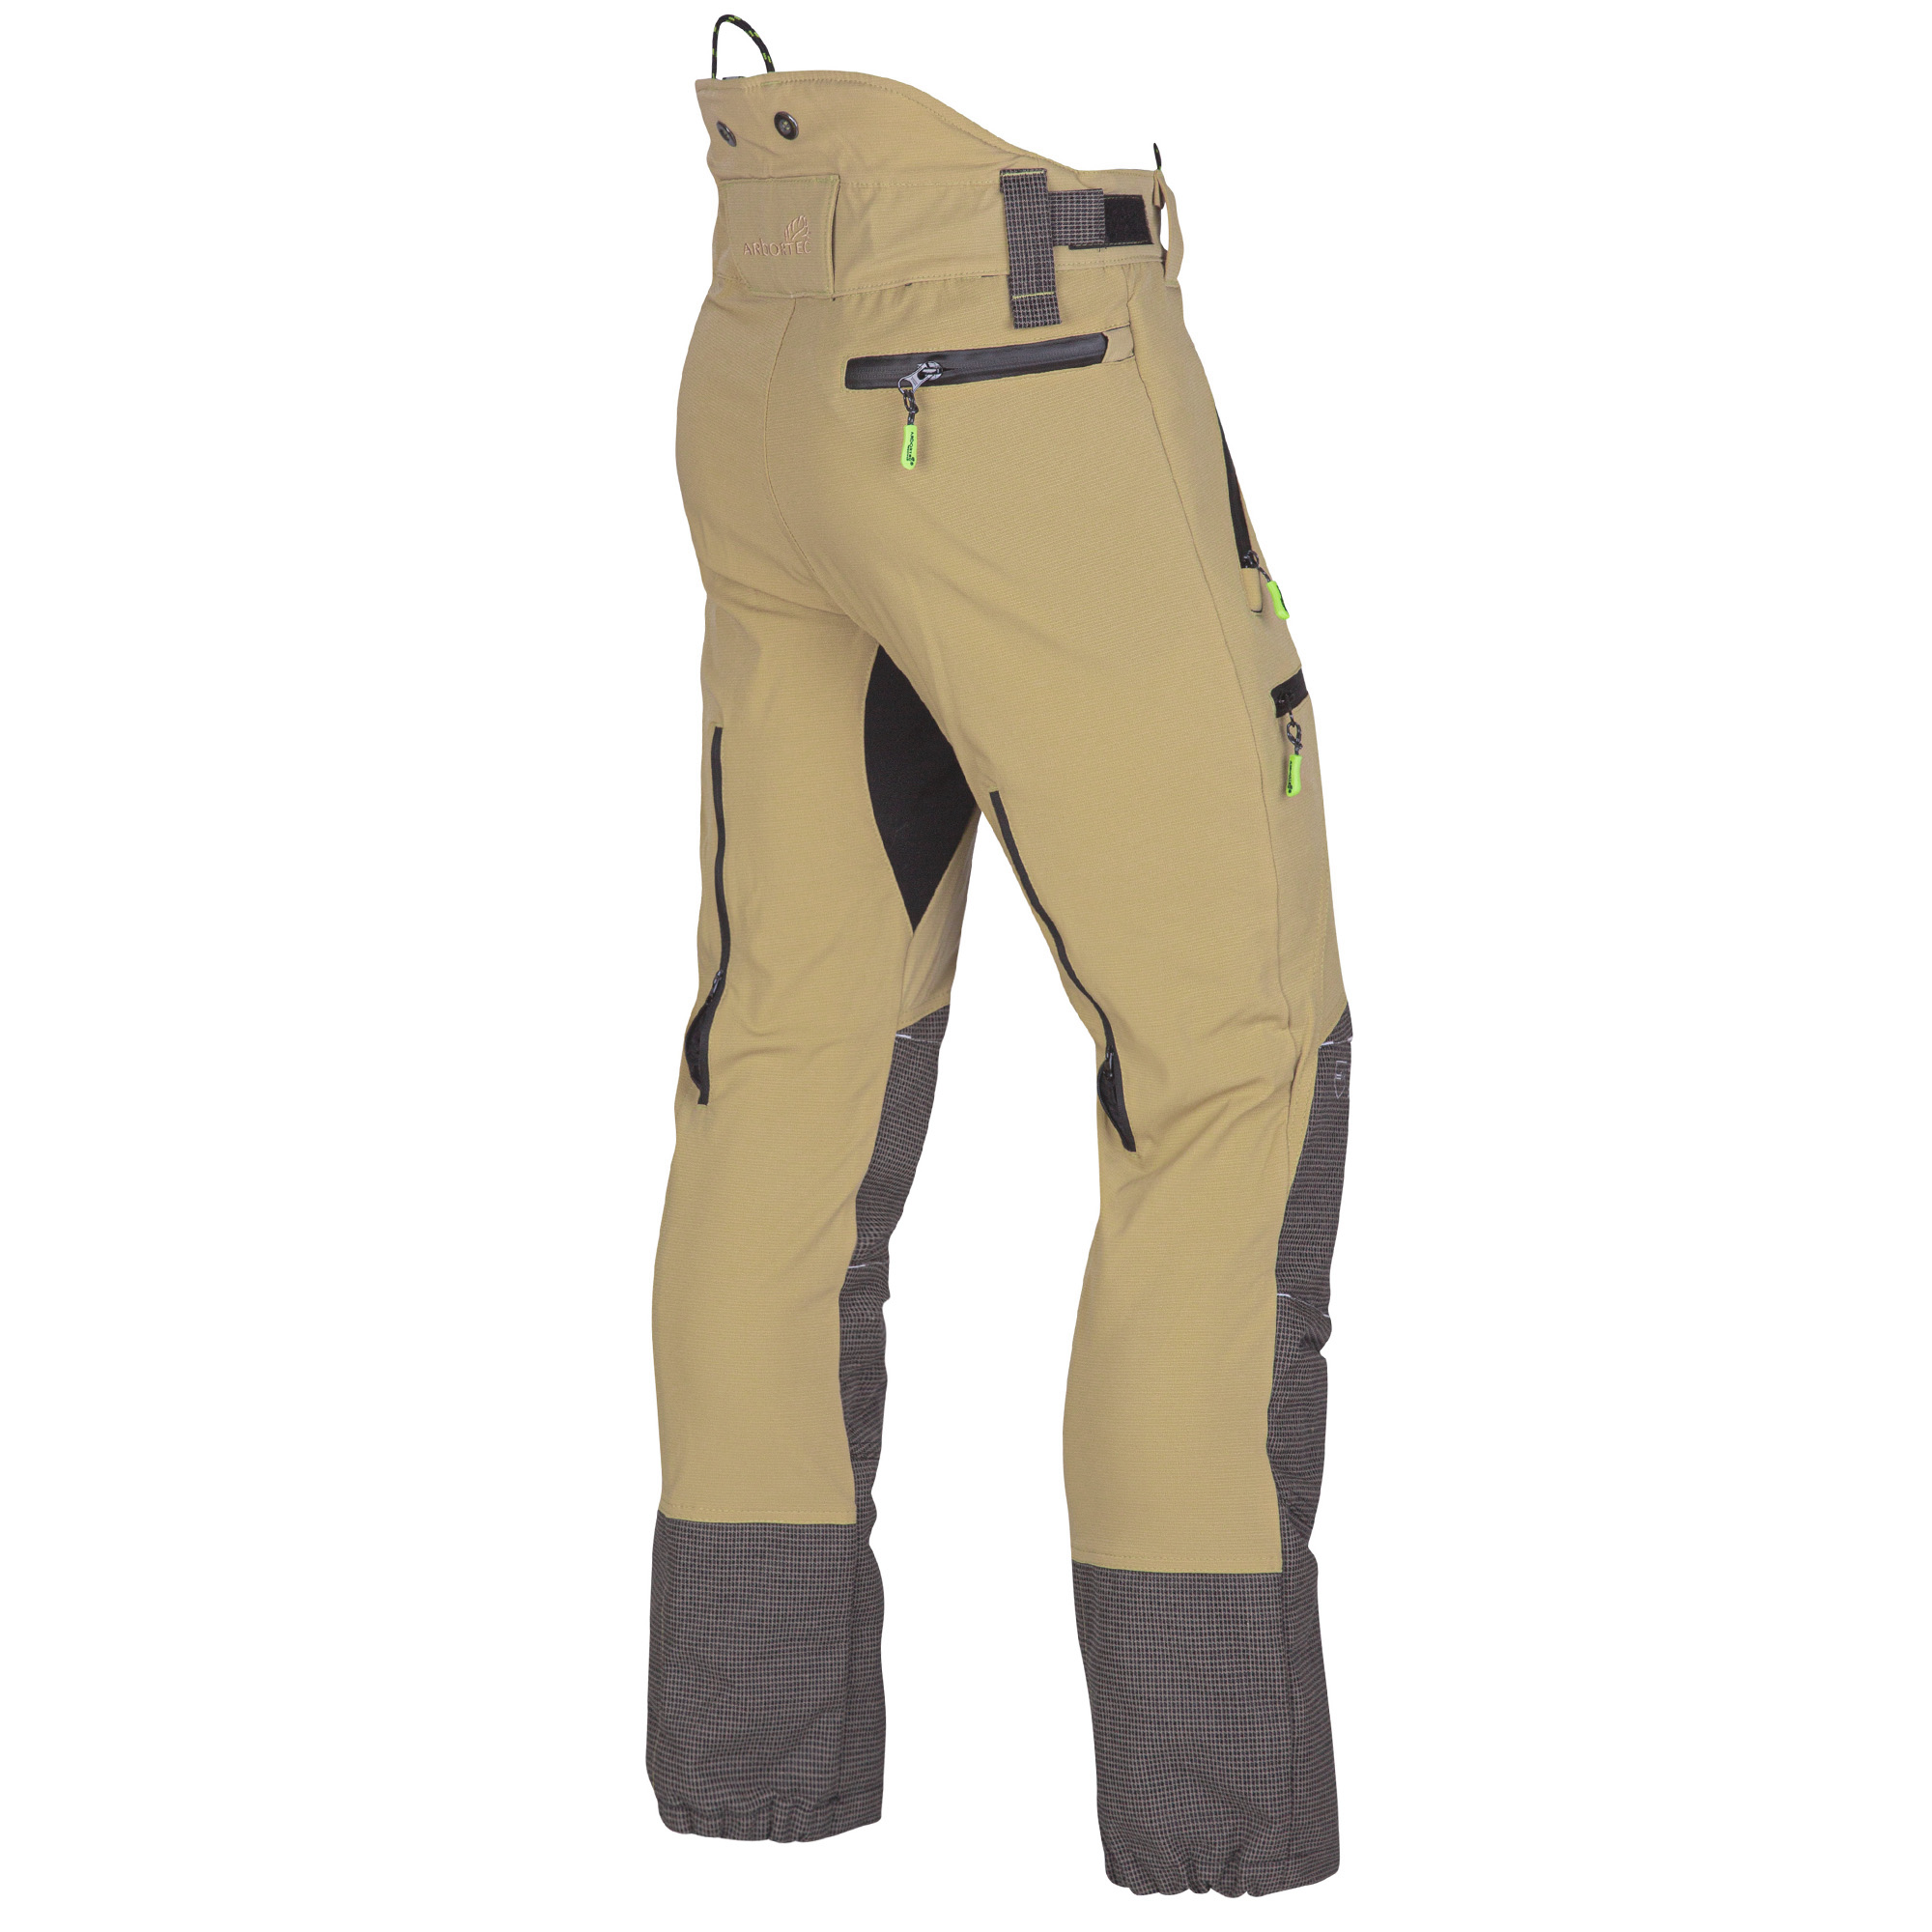 AT4060(US) Breatheflex Pro Chainsaw Trousers UL Rated - Beige